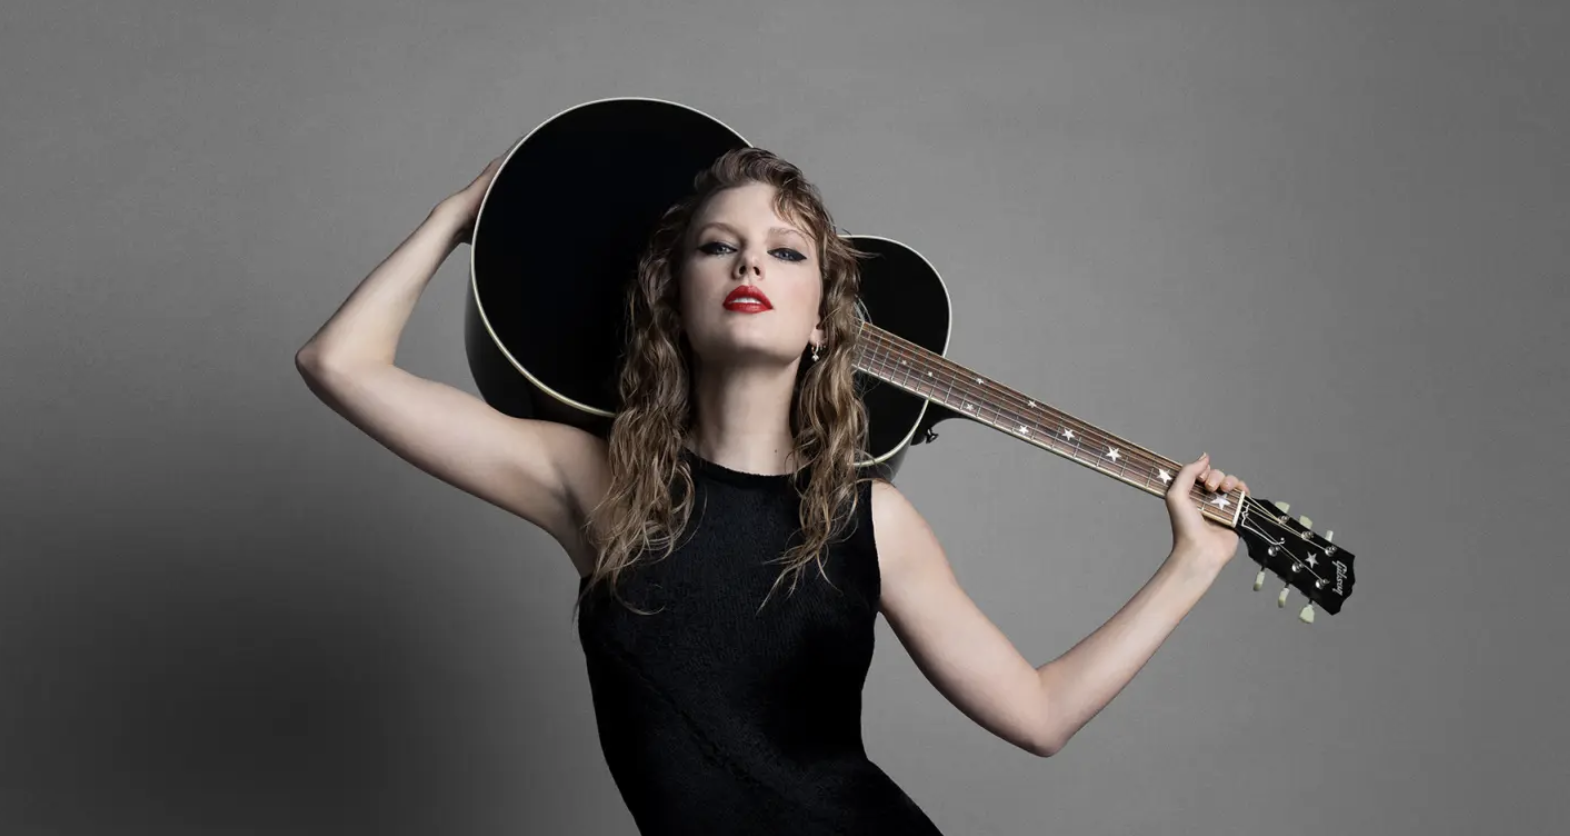 https://www.disneyfoodblog.com/wp-content/uploads/2023/12/2023-taylor-swift-person-of-the-year2023-taylor-swift-person-of-the-year-3.png